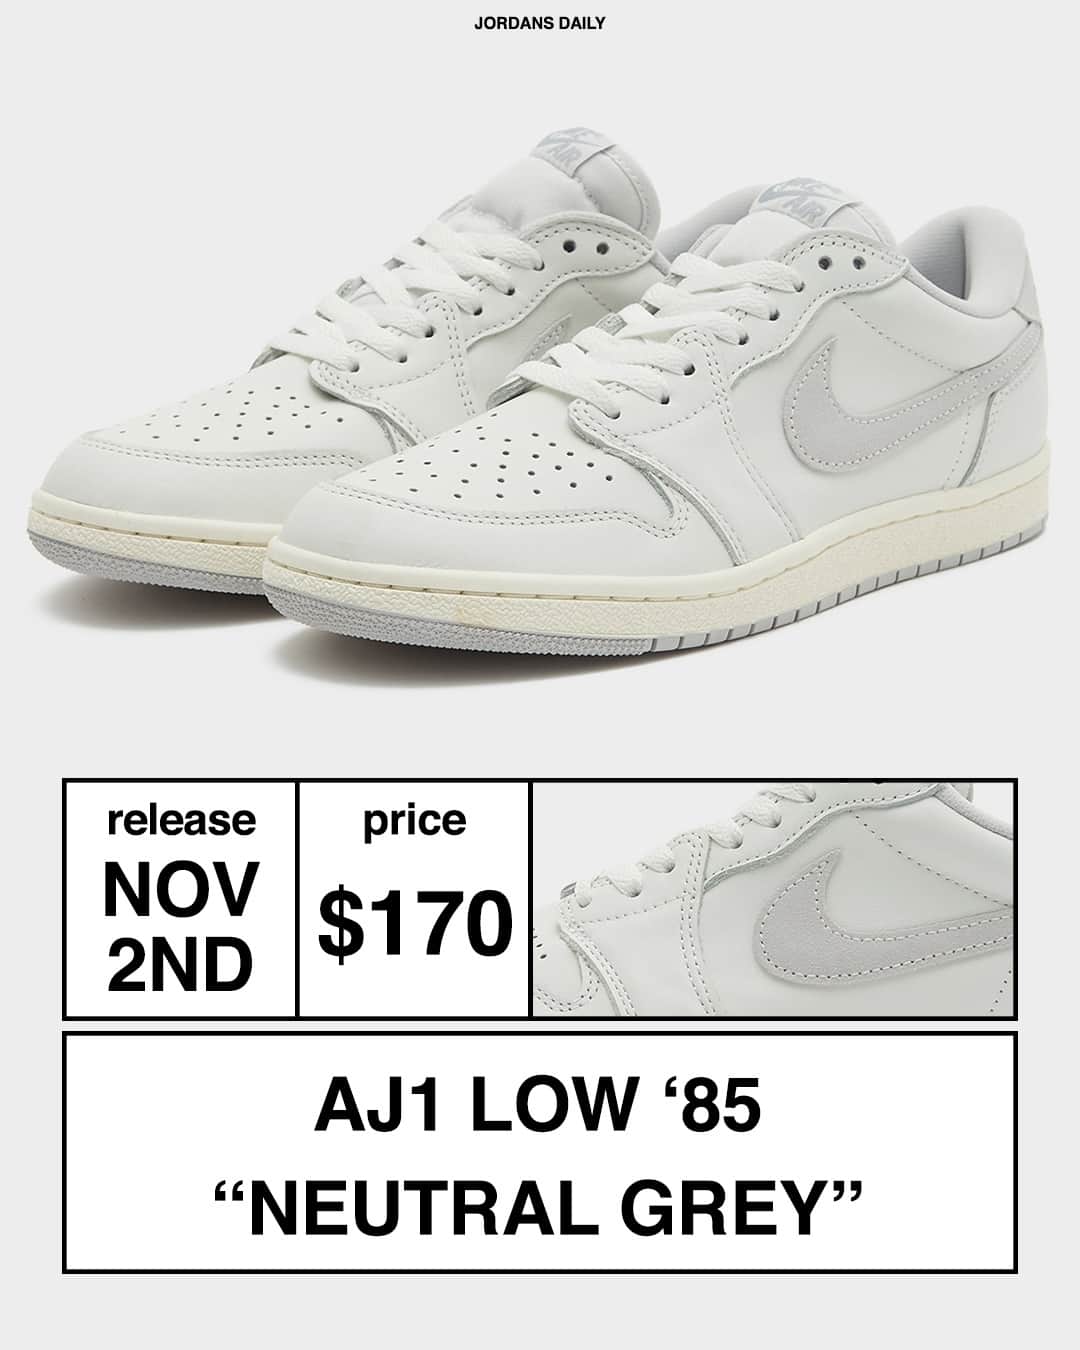 Sneaker News x Jordans Dailyのインスタグラム：「Following an early release at select retailers, the Air Jordan 1 Low '85 "Neutral Grey" will soon be available globally on November 2nd. For more details, hit the link in the bio!」